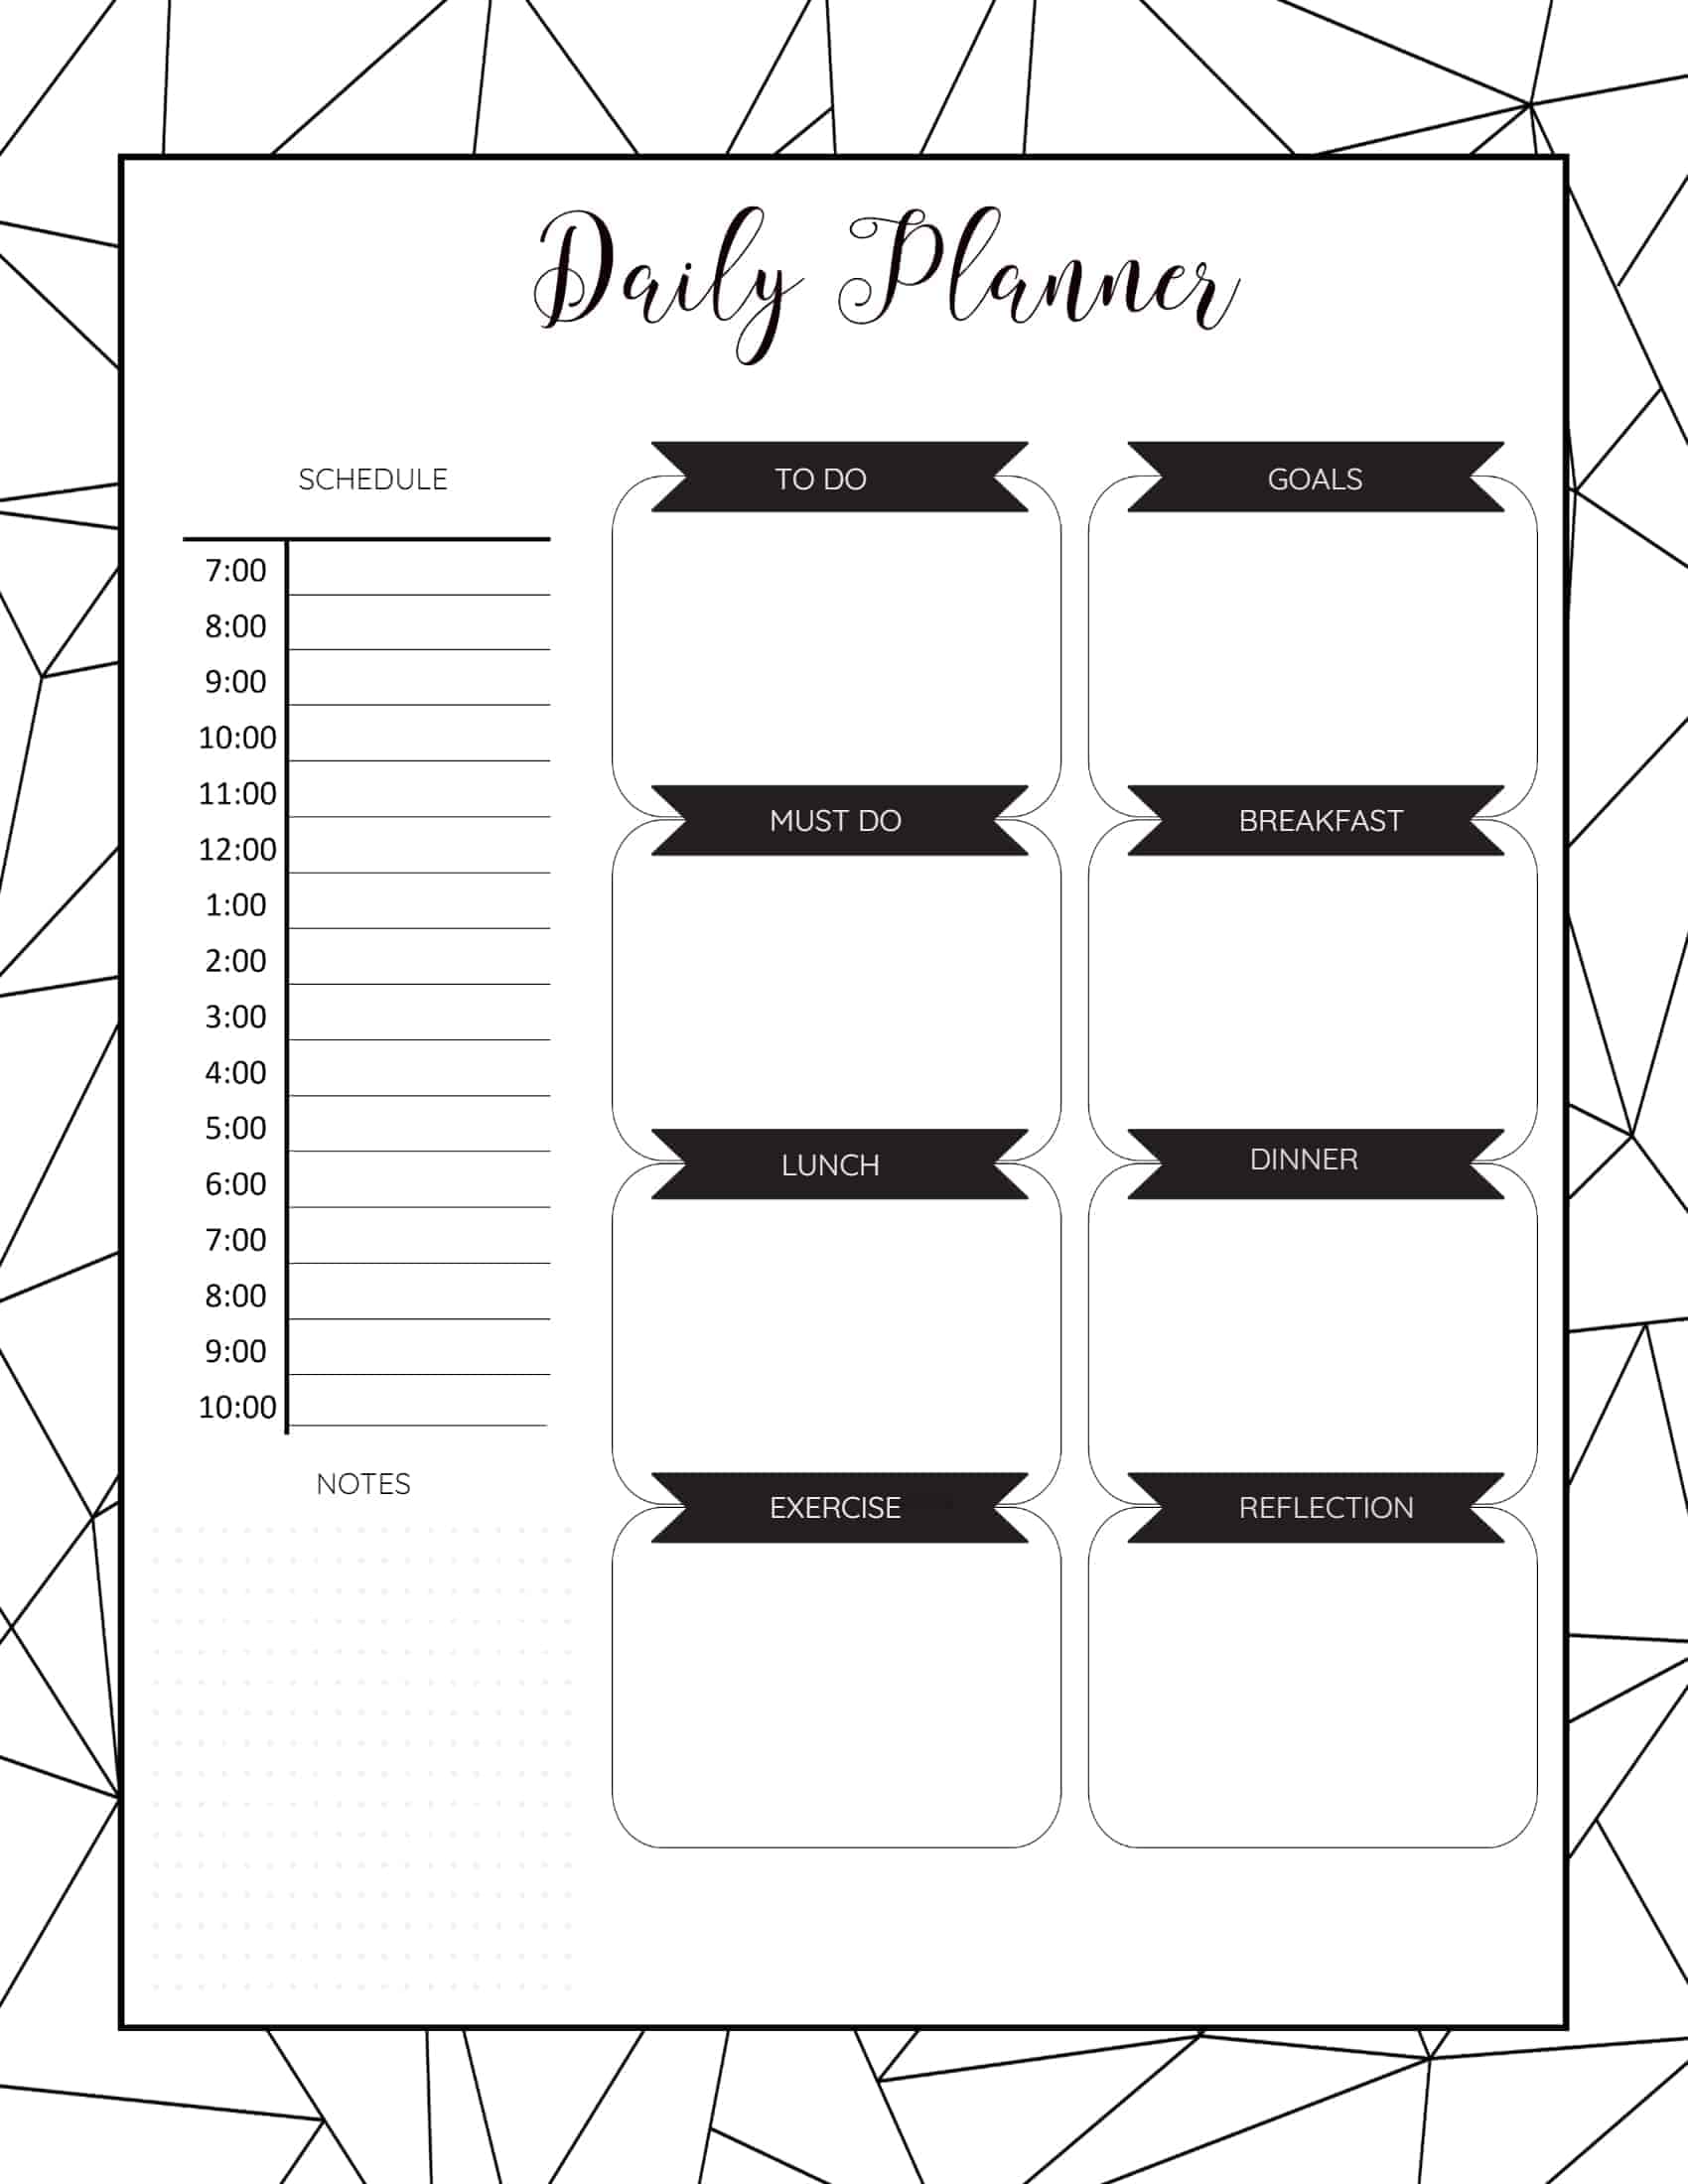 daily schedule free printable daily planner template